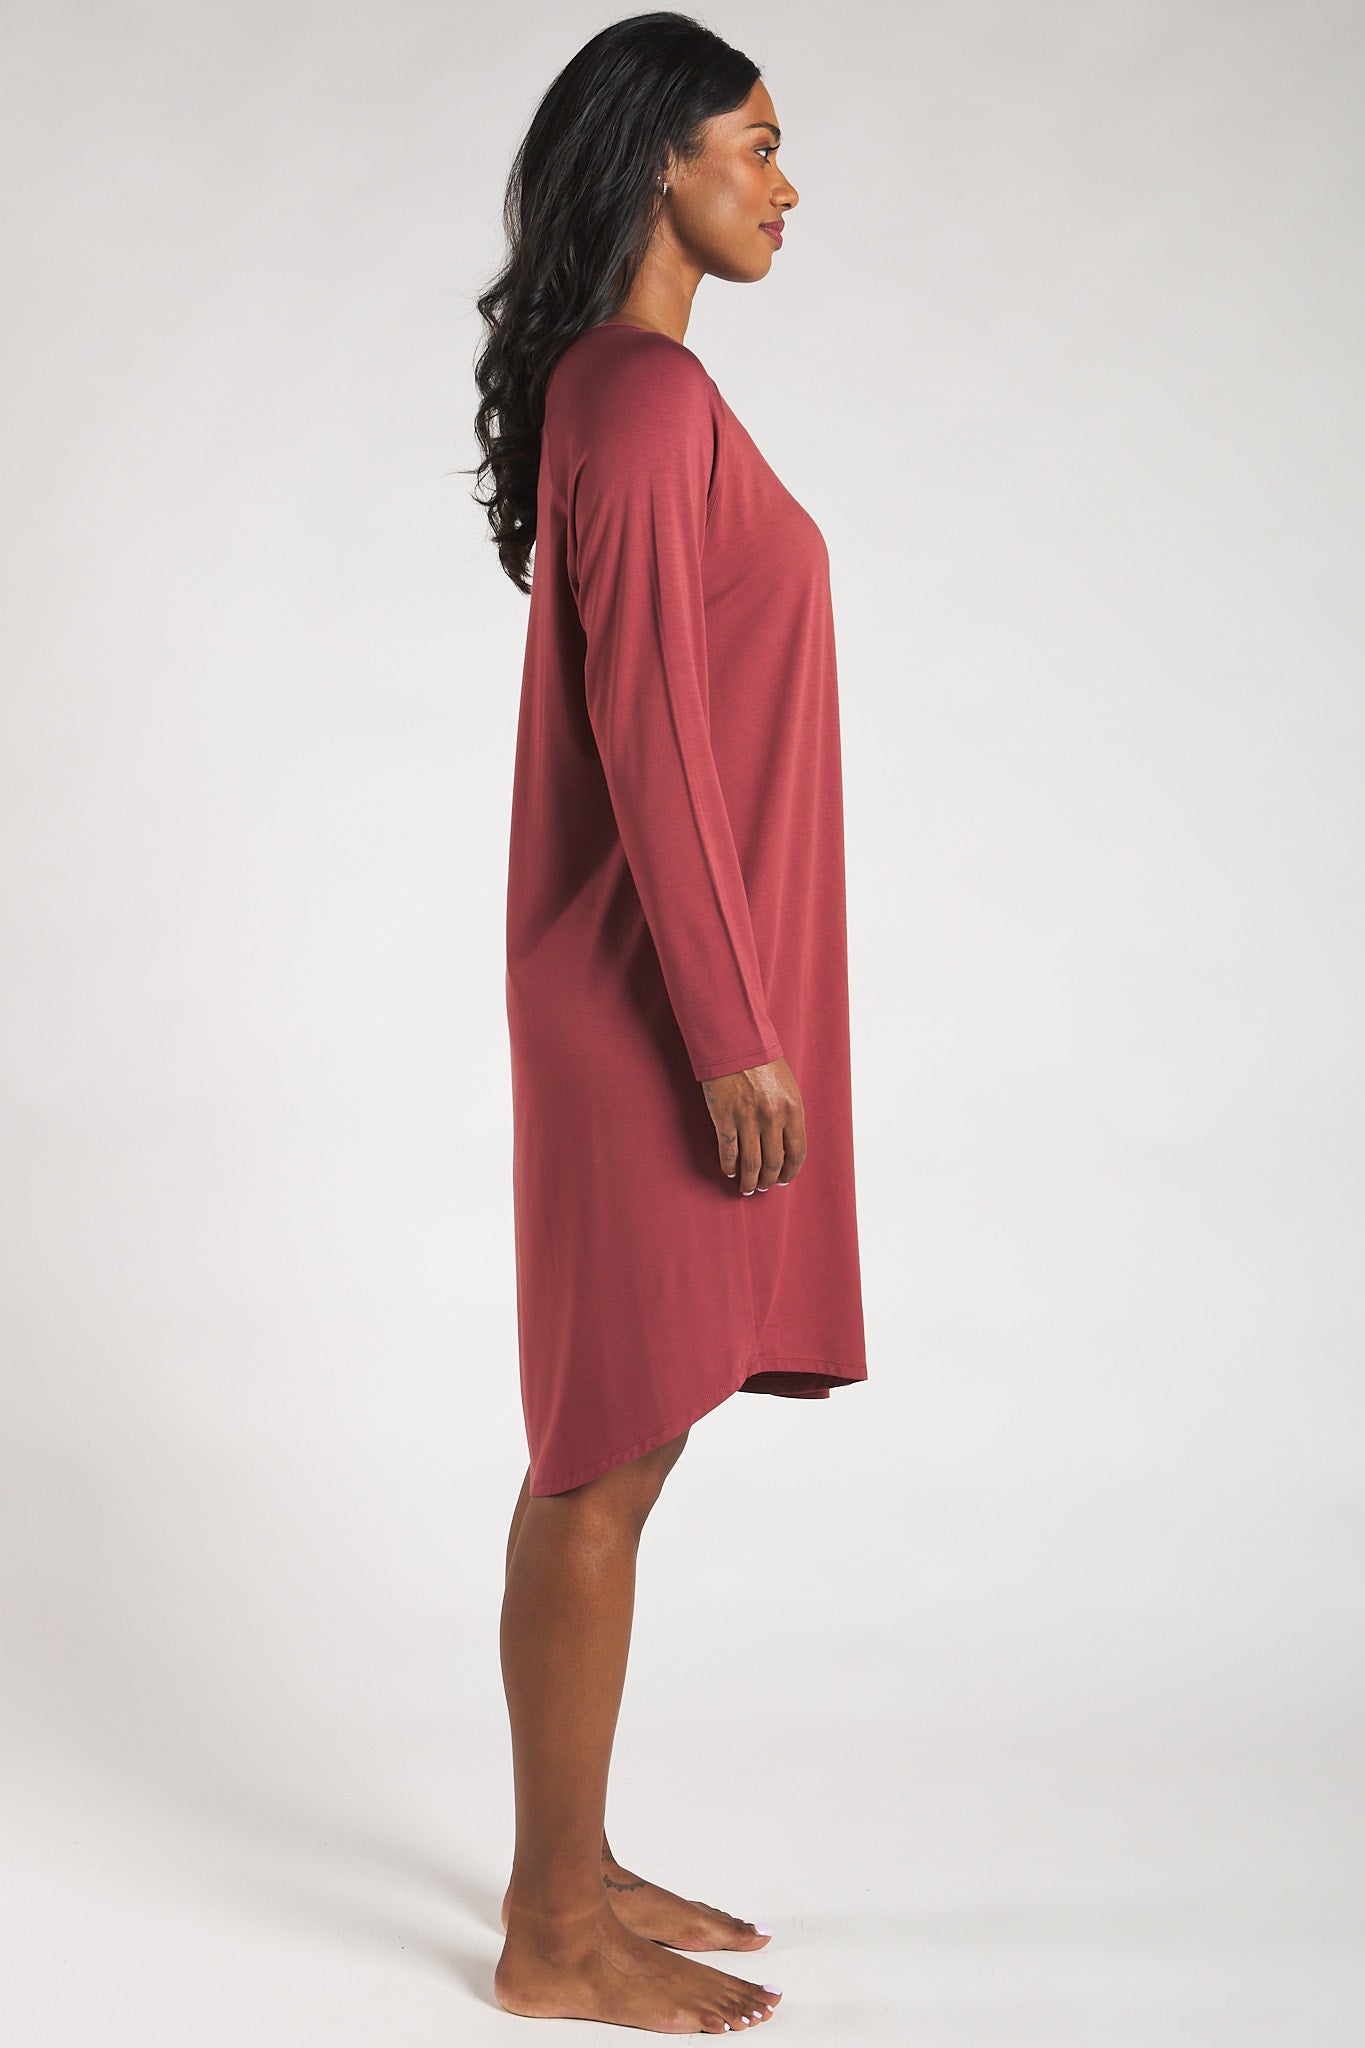 Side view of a woman wearing a soft Rosewood bamboo sleep dress from Terrera.